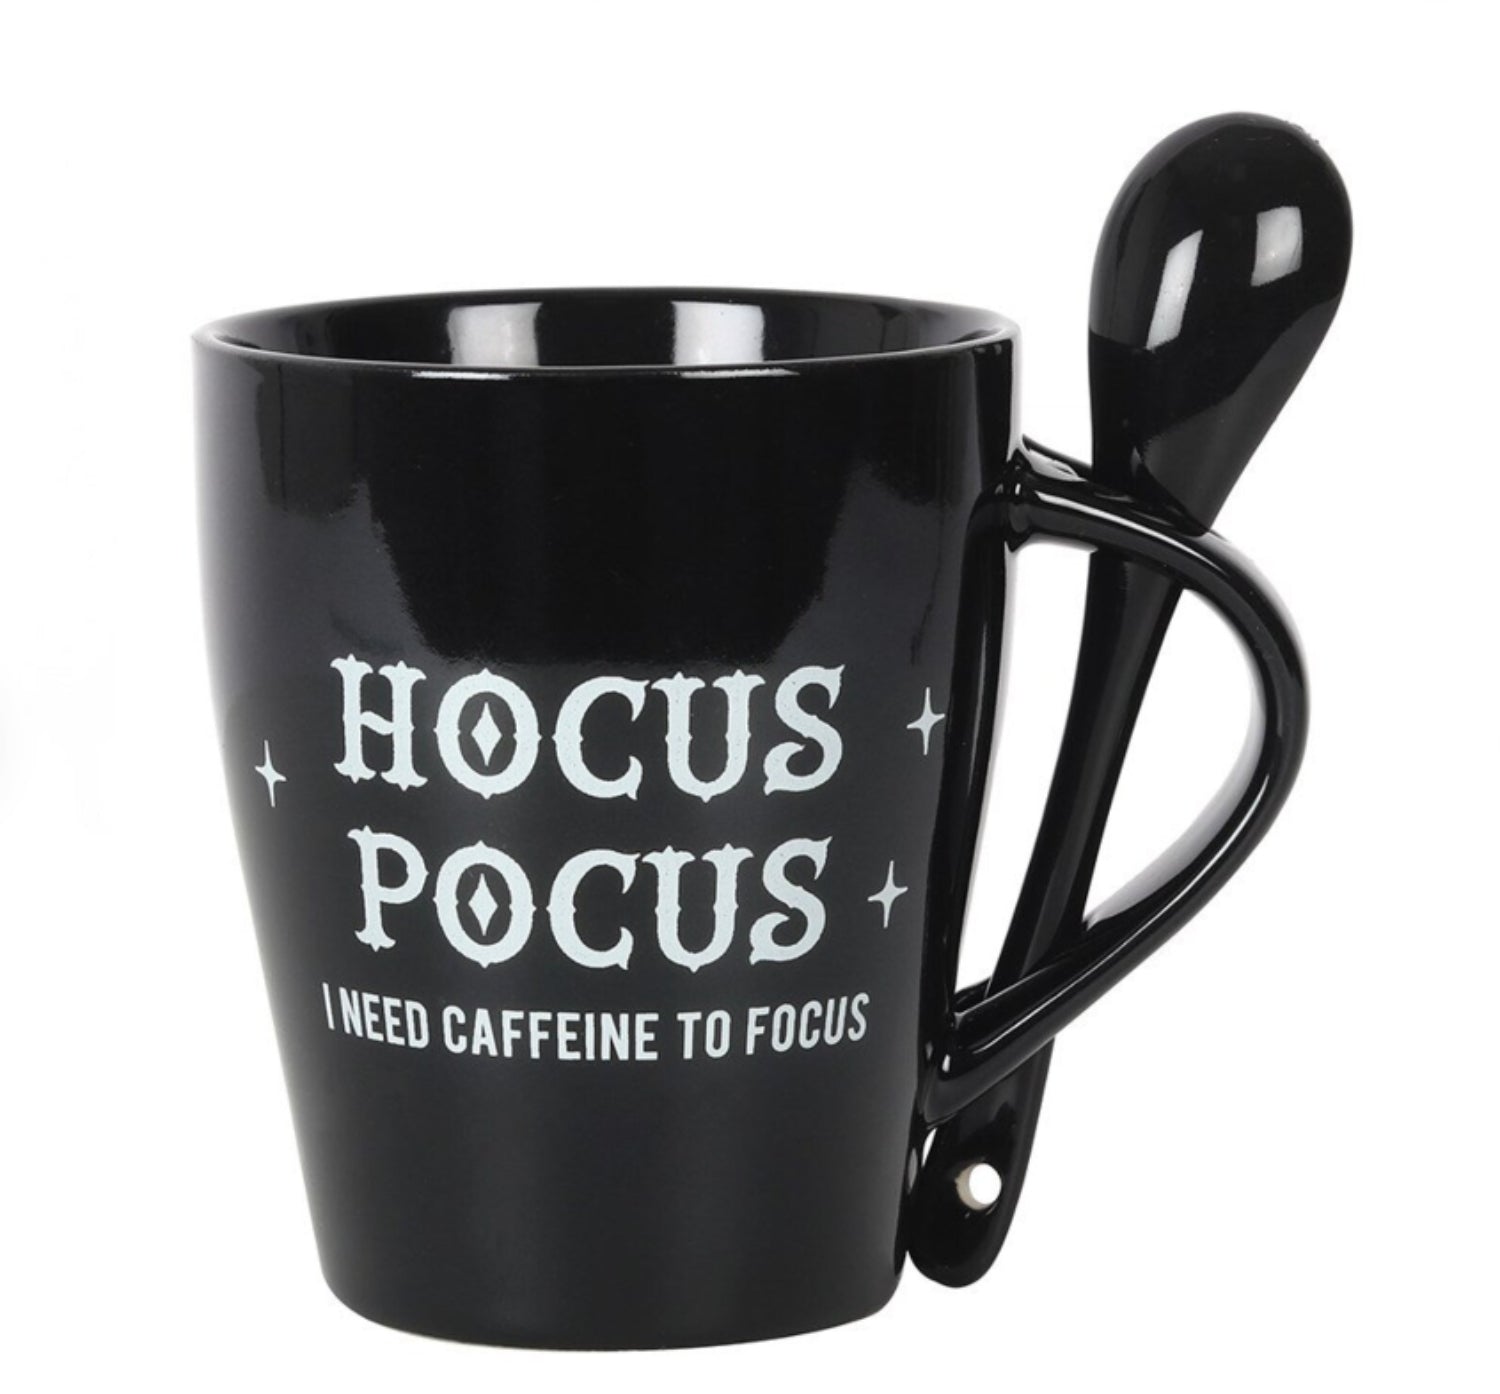 Hocus Pocus Cup and Spoon Set - 13 Moons